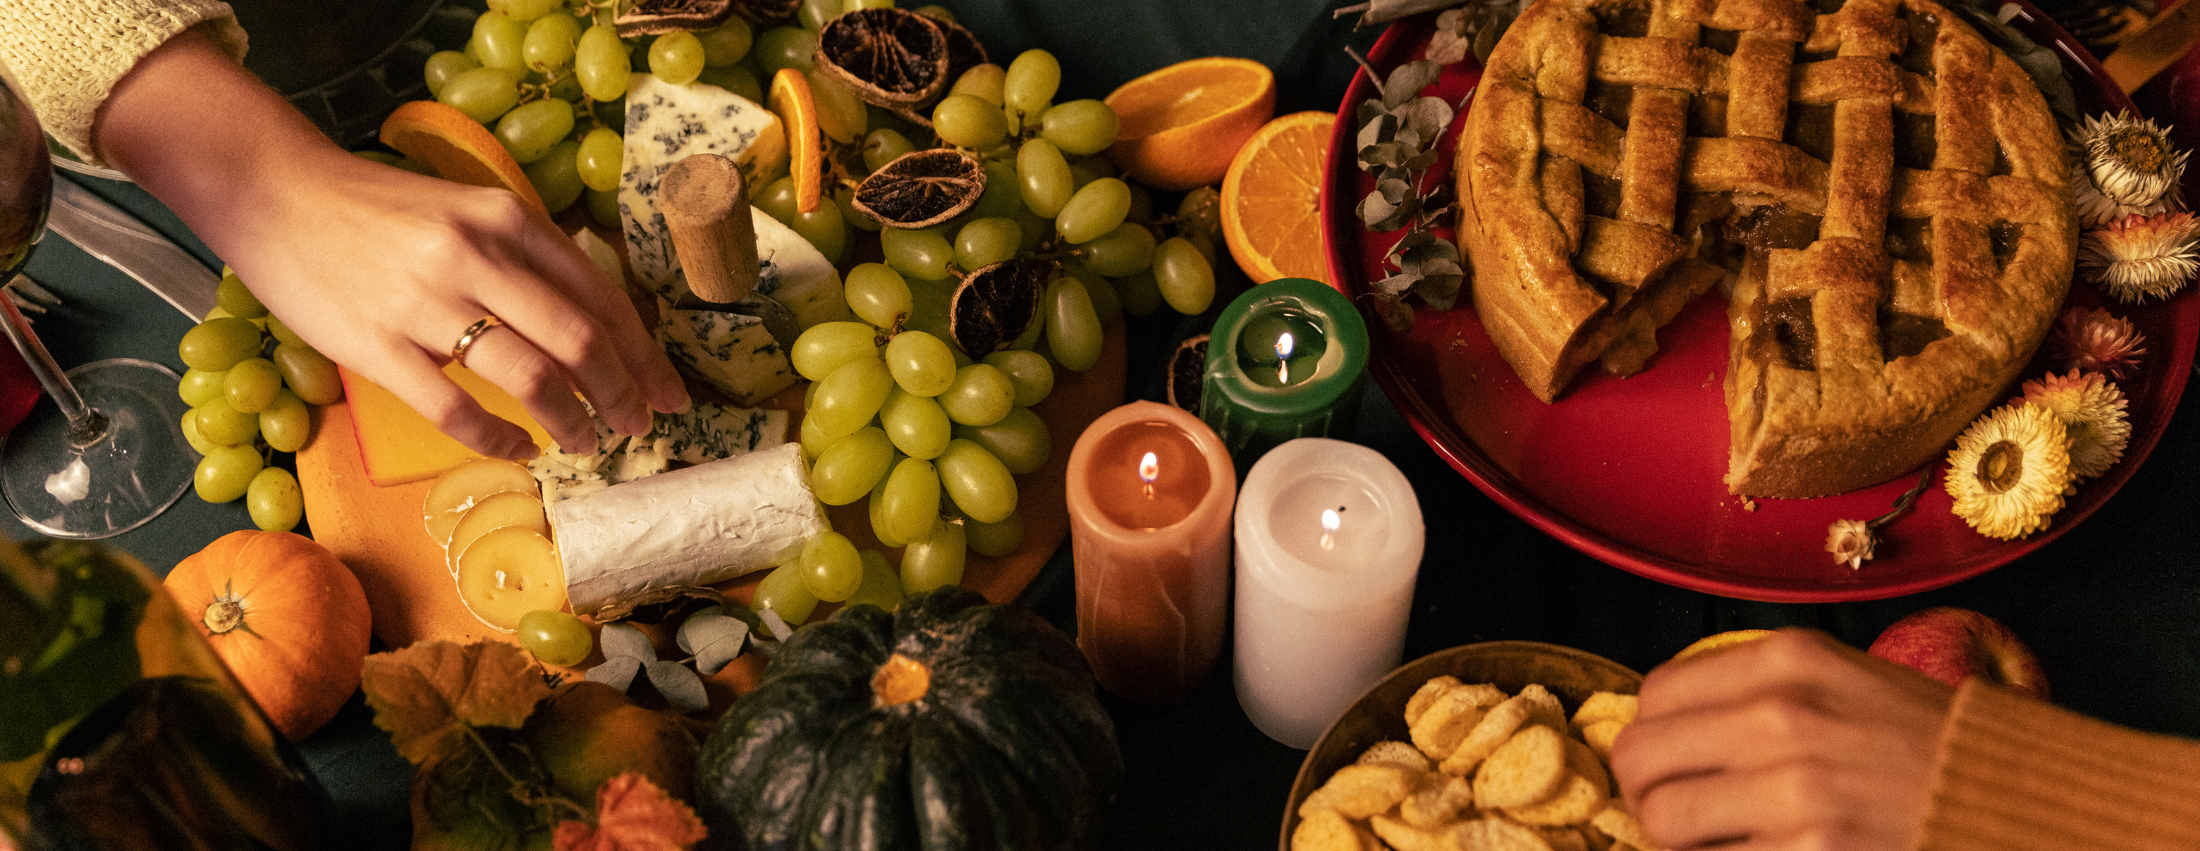 Table filled with grapes, oranges, candles and a pie